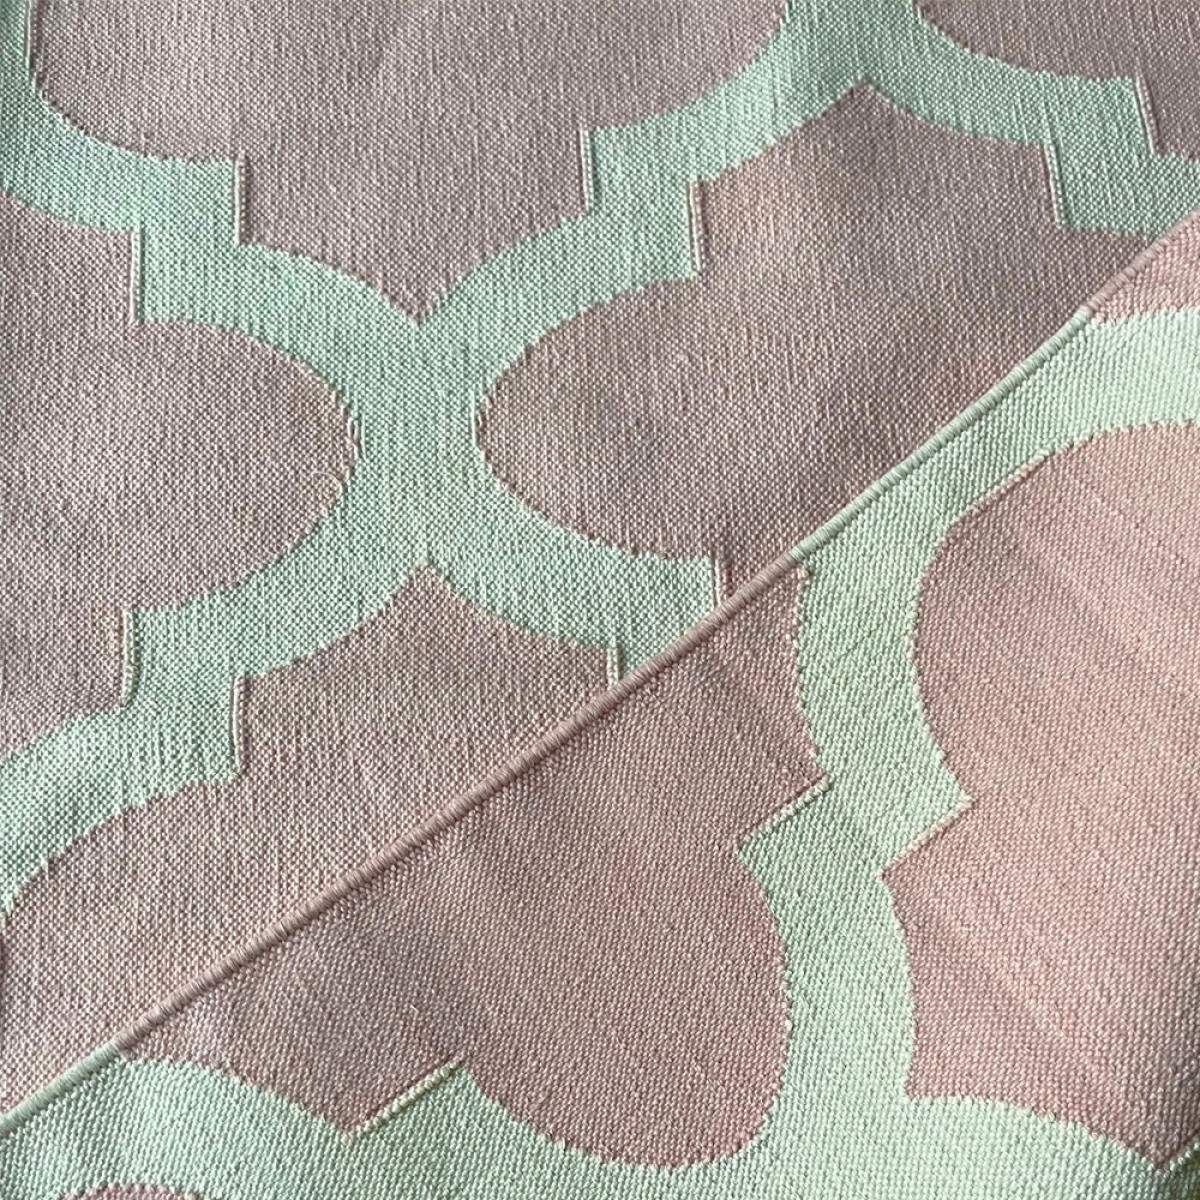 Cotton Floor Rugs - Baby Pink (Made to Order)